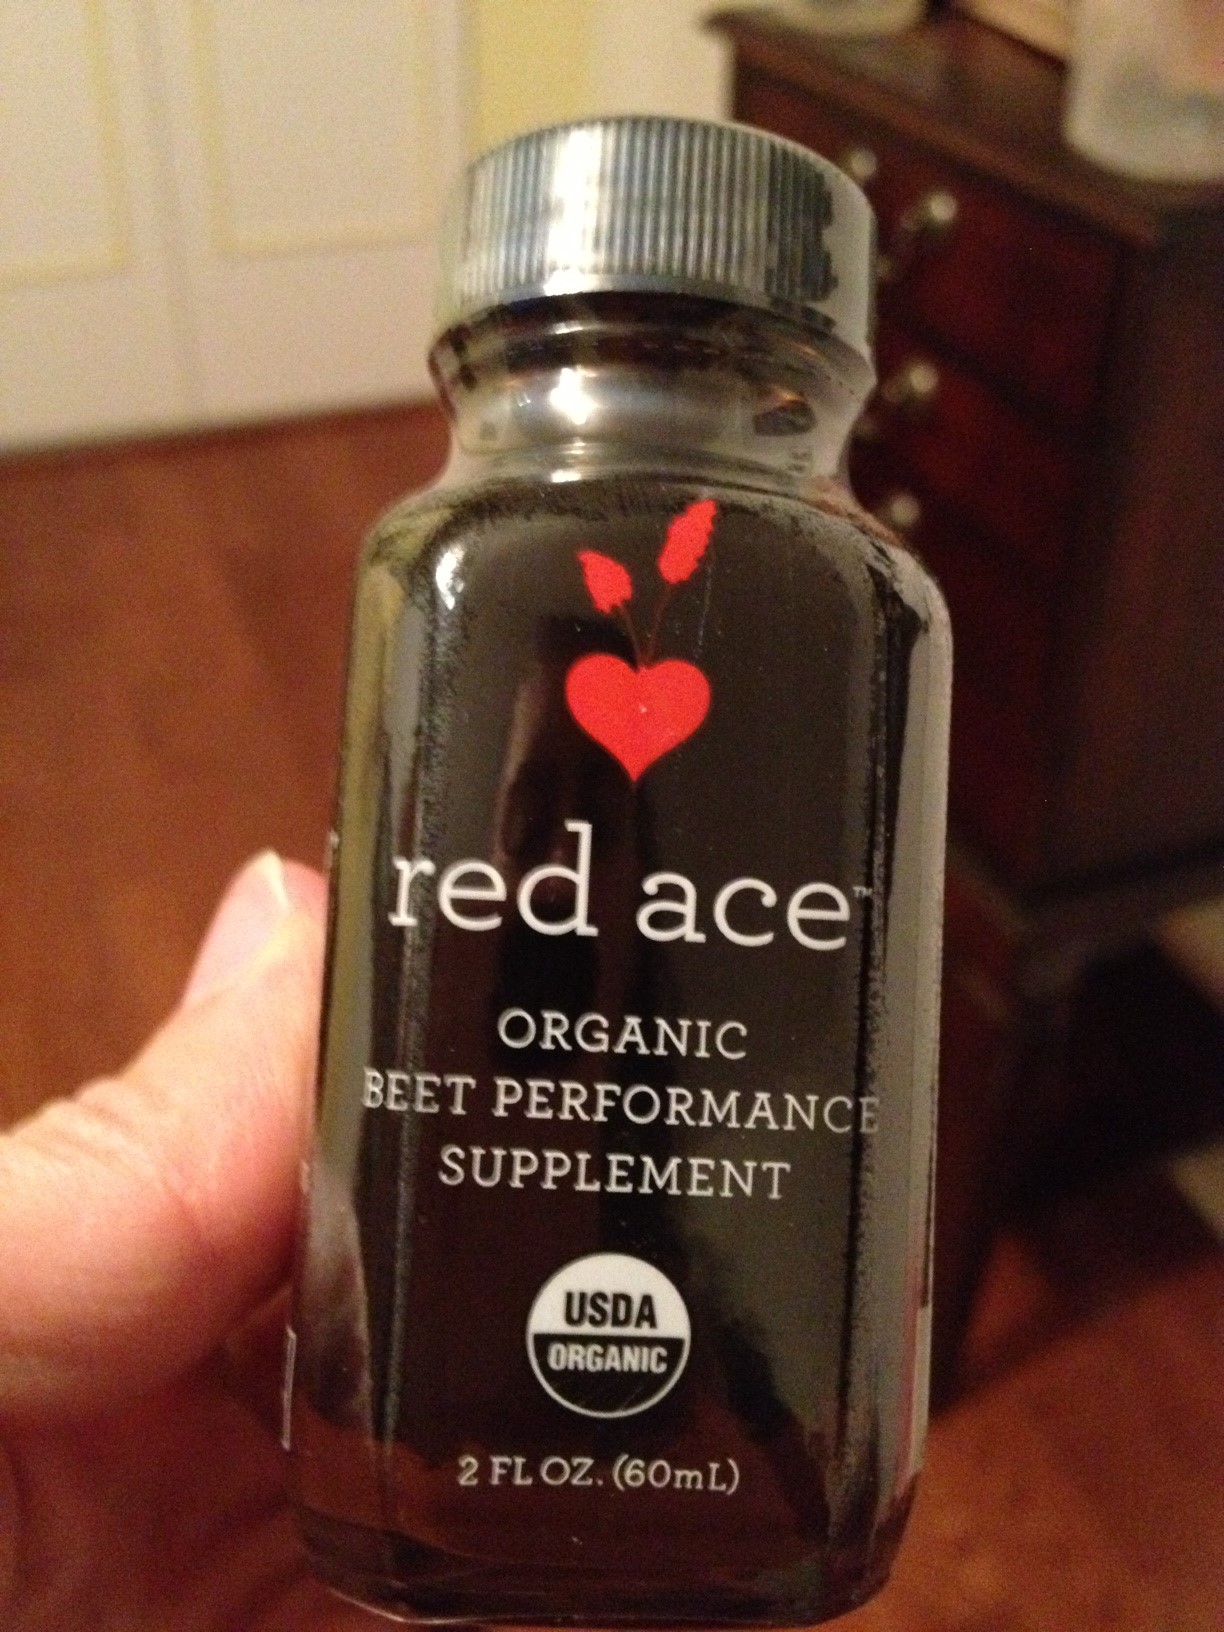 Red Ace Organic Beet Performance Supplement